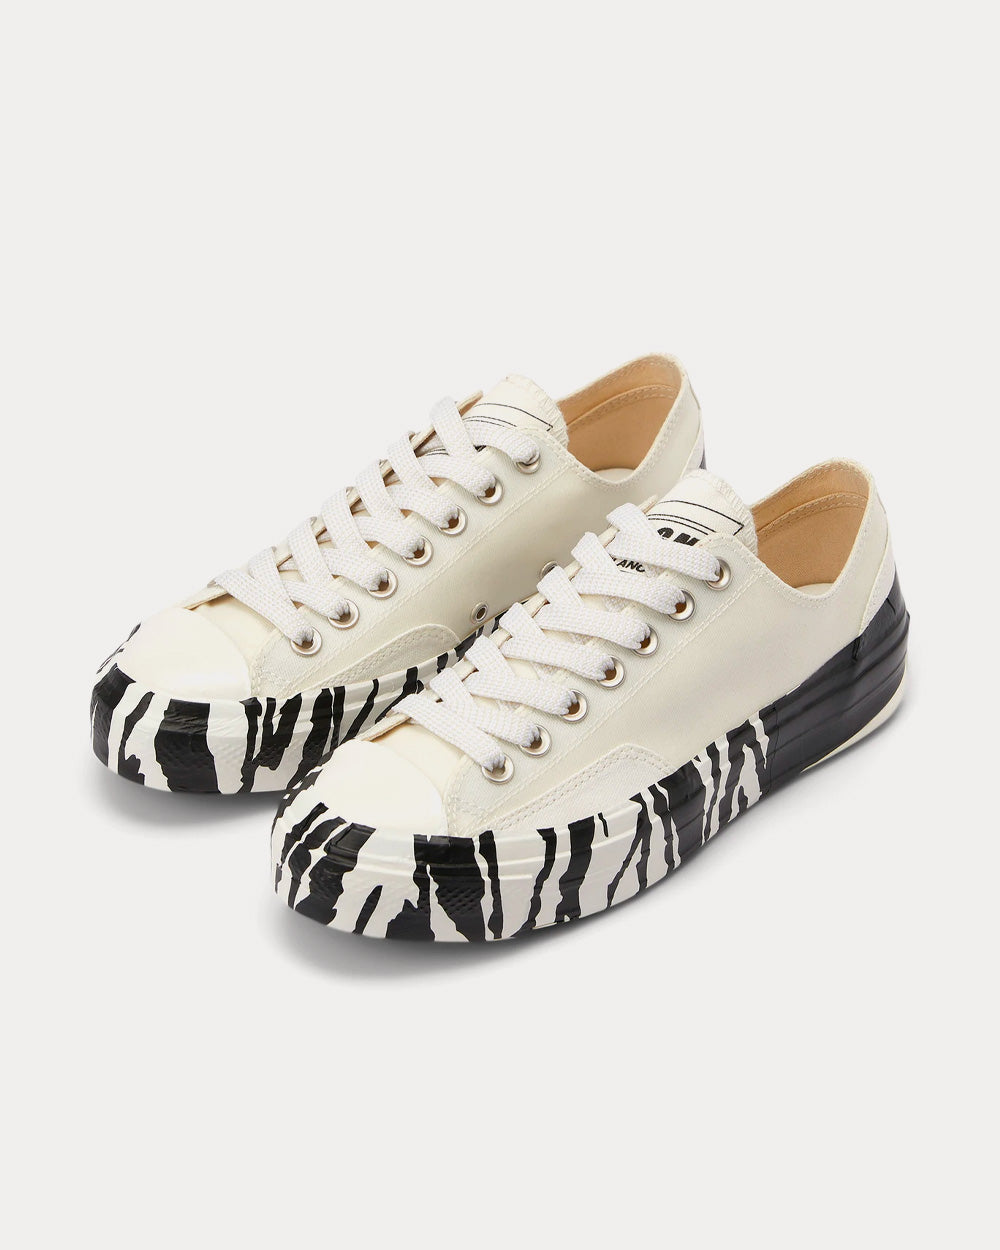 MSGM - Tape Appliqued Vulcanized Canvas White / Dark Grey Low Top Sneakers